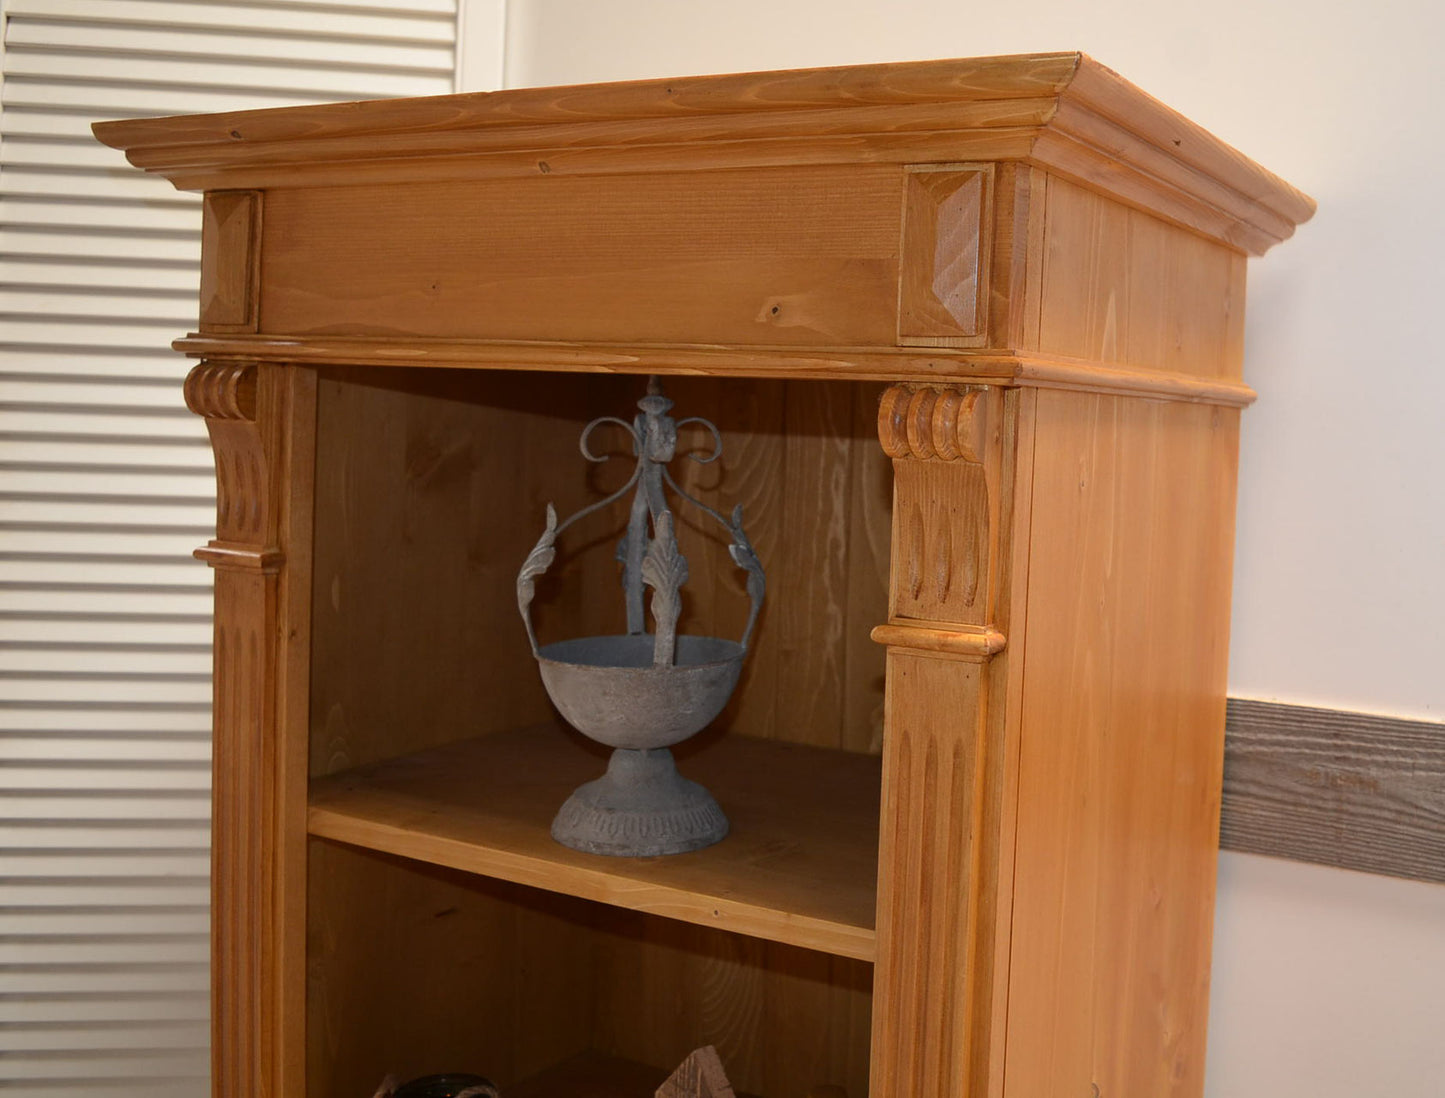 Arvid - Country house linen cupboard in Wilhelminian style